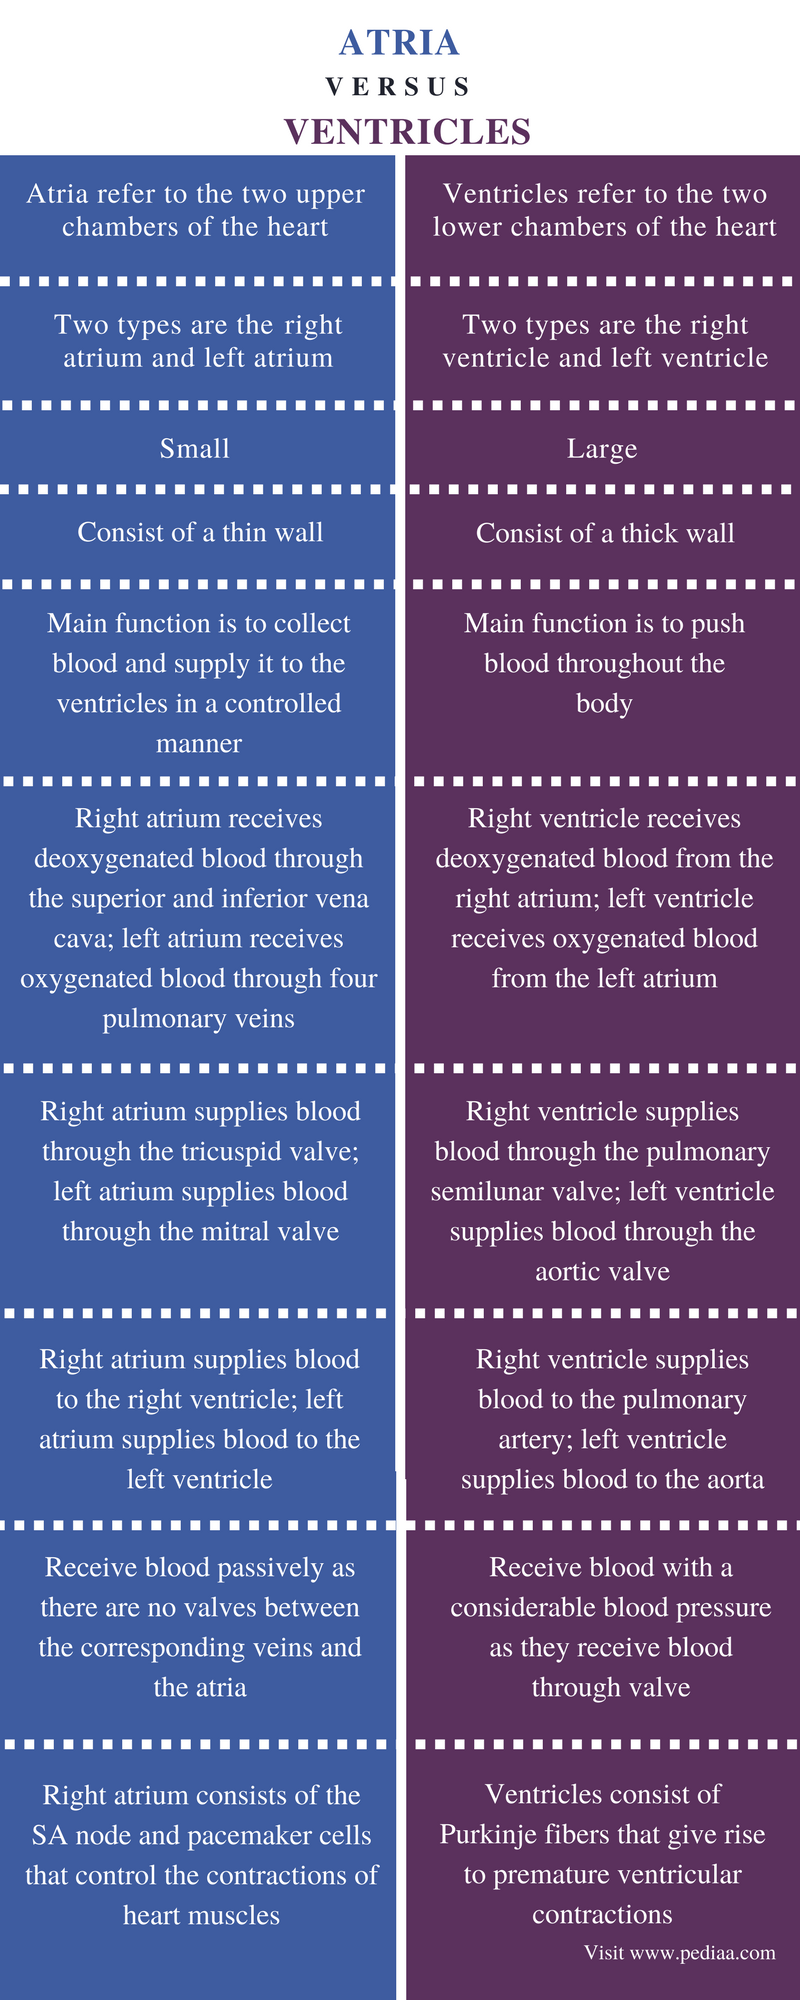 Difference Between Atria and Ventricles | Definition ...